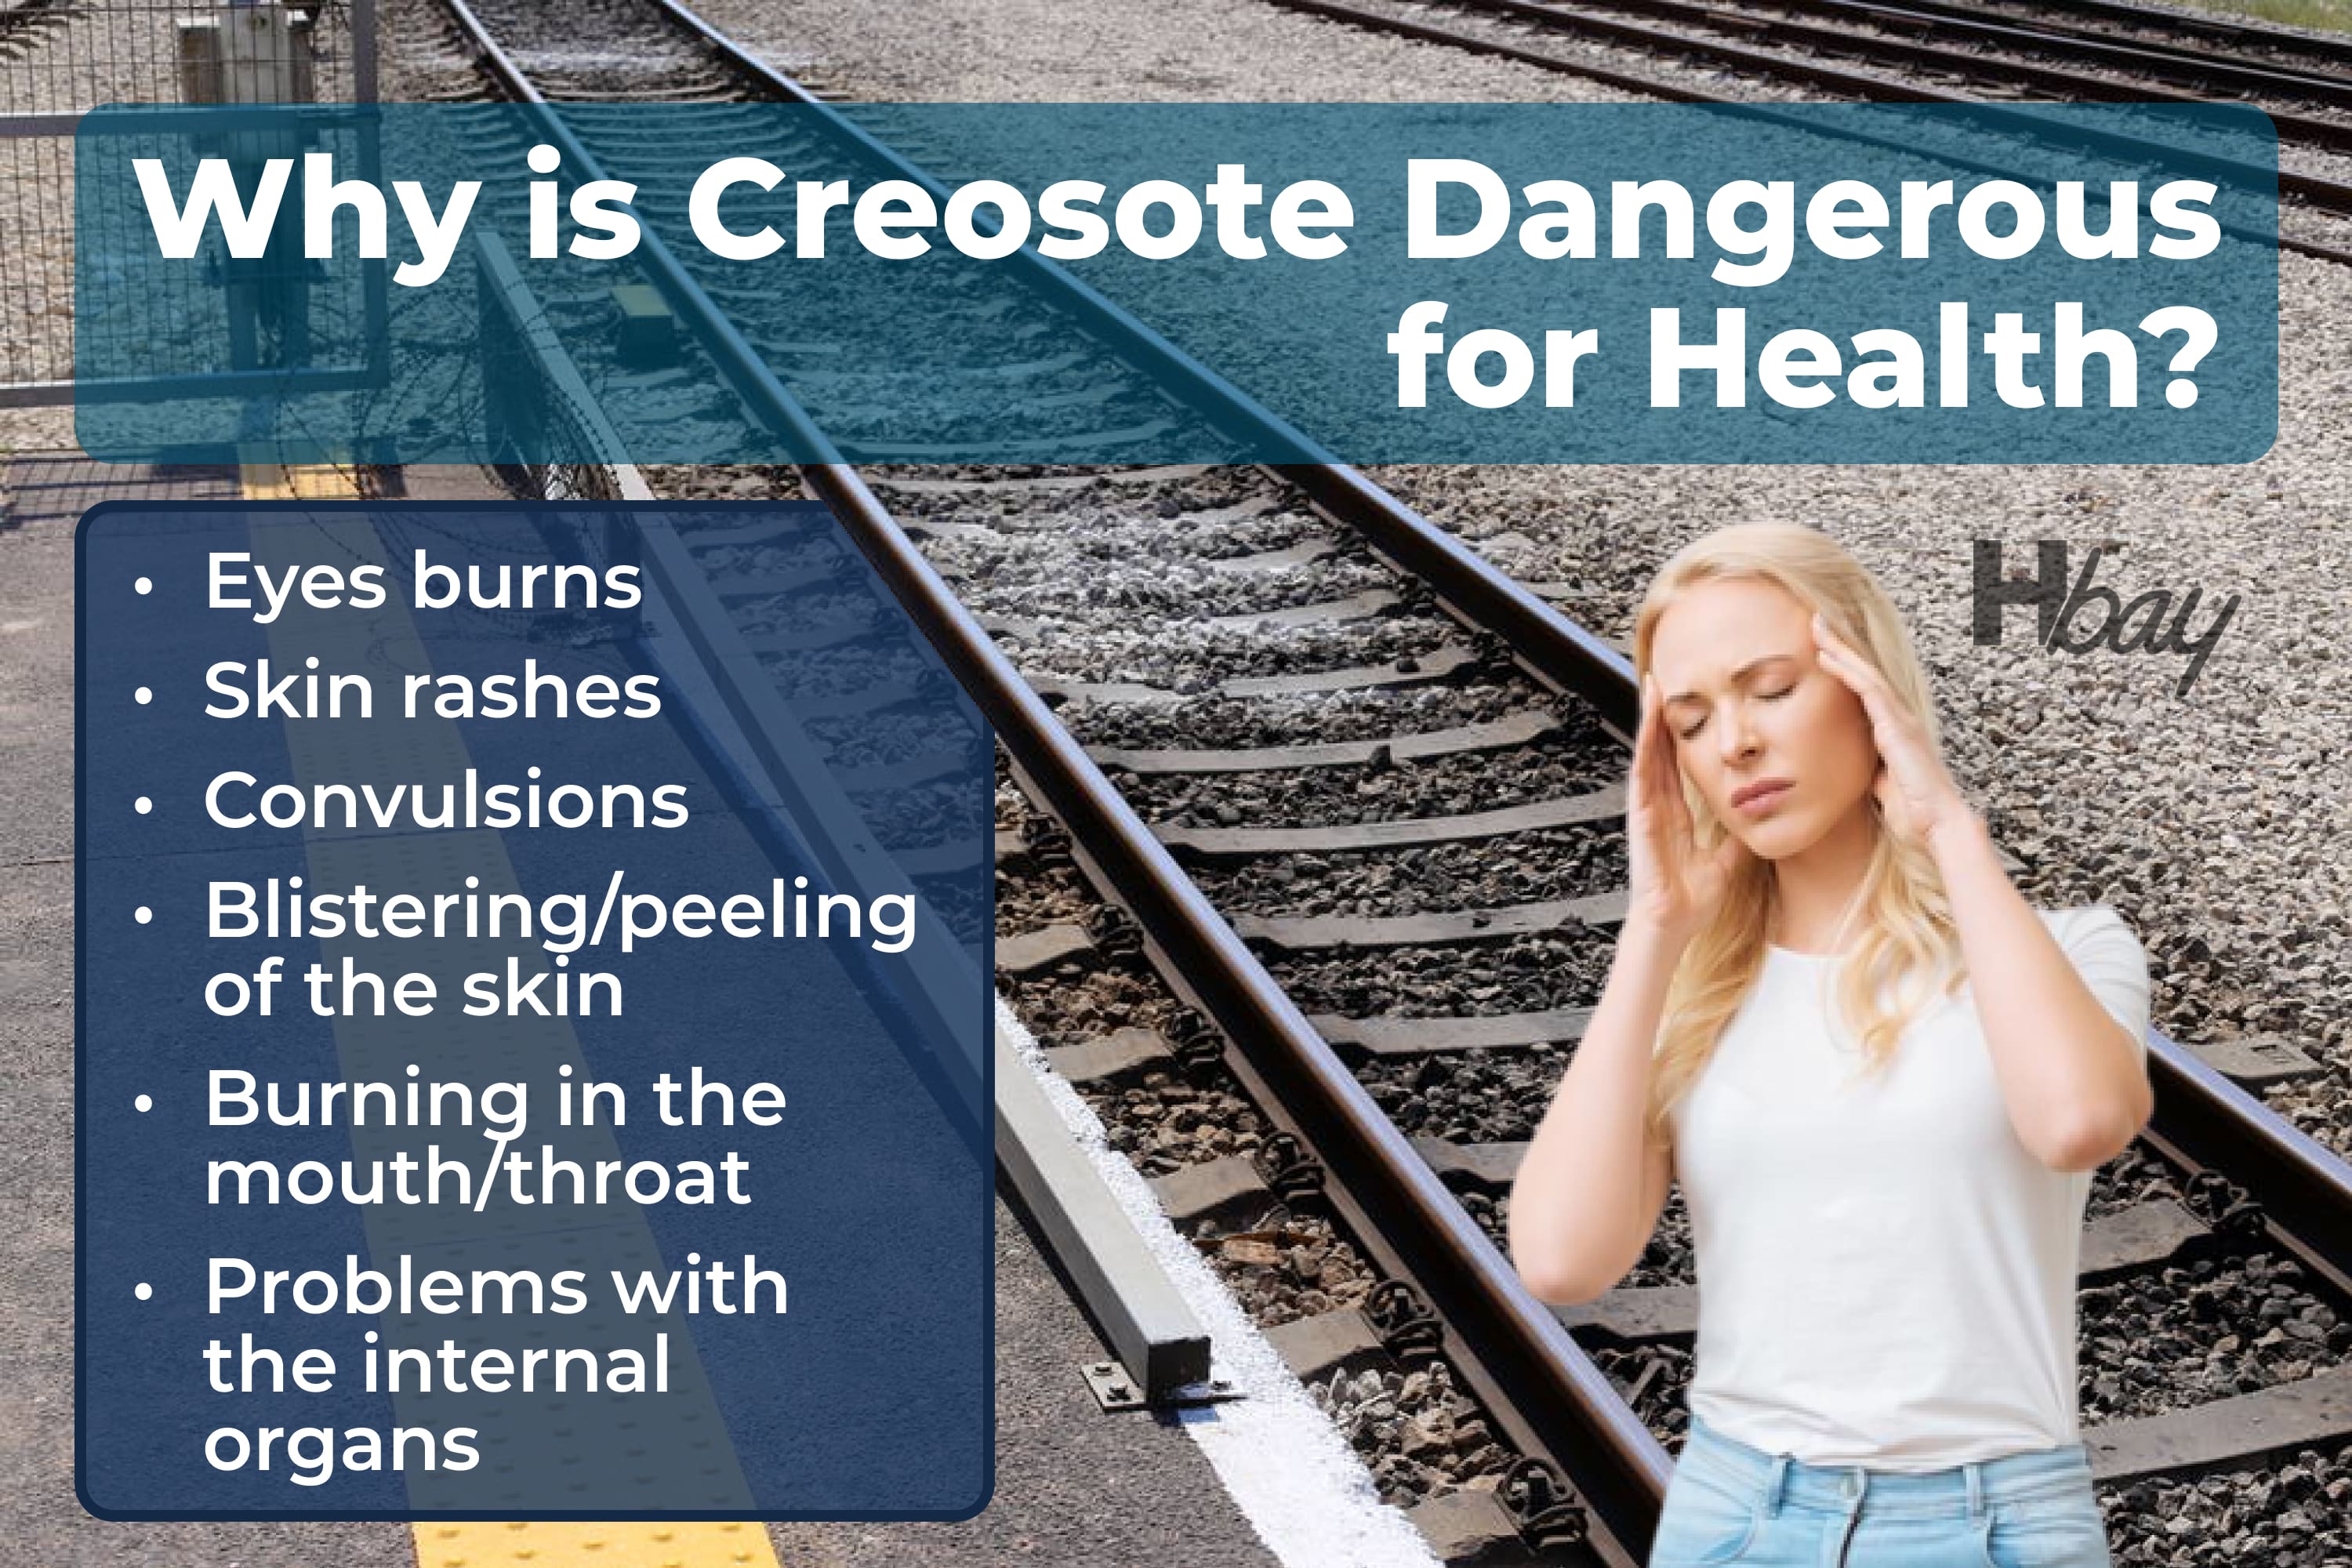 Why is creosote dangerous for health